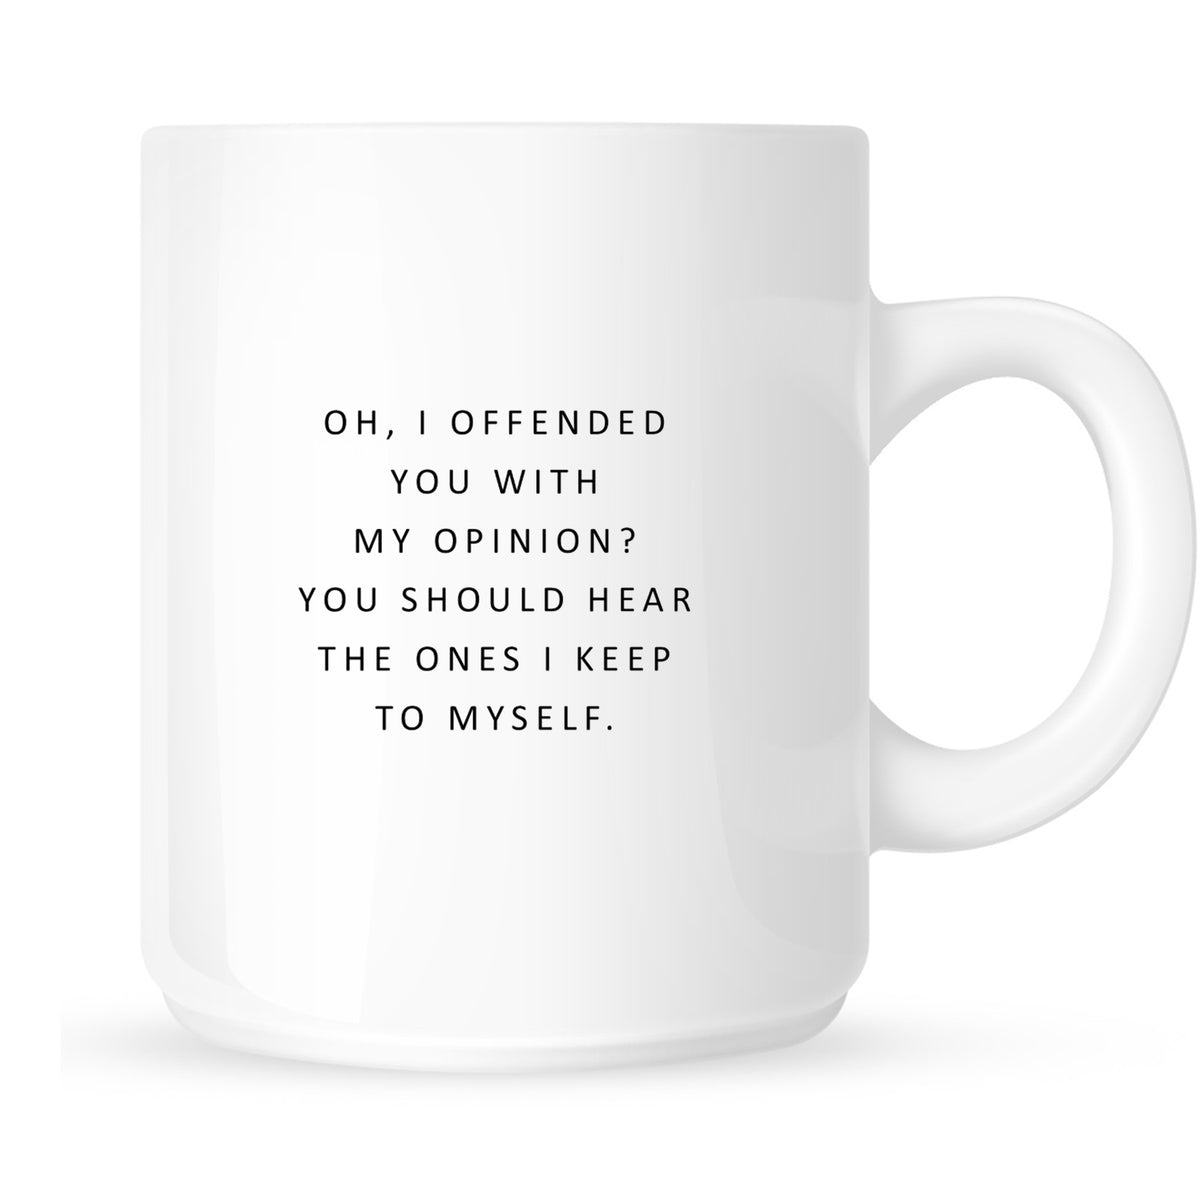 Mug - Oh, I Offended You With My Opinion? You Should Hear the Ones I Keep to Myself.